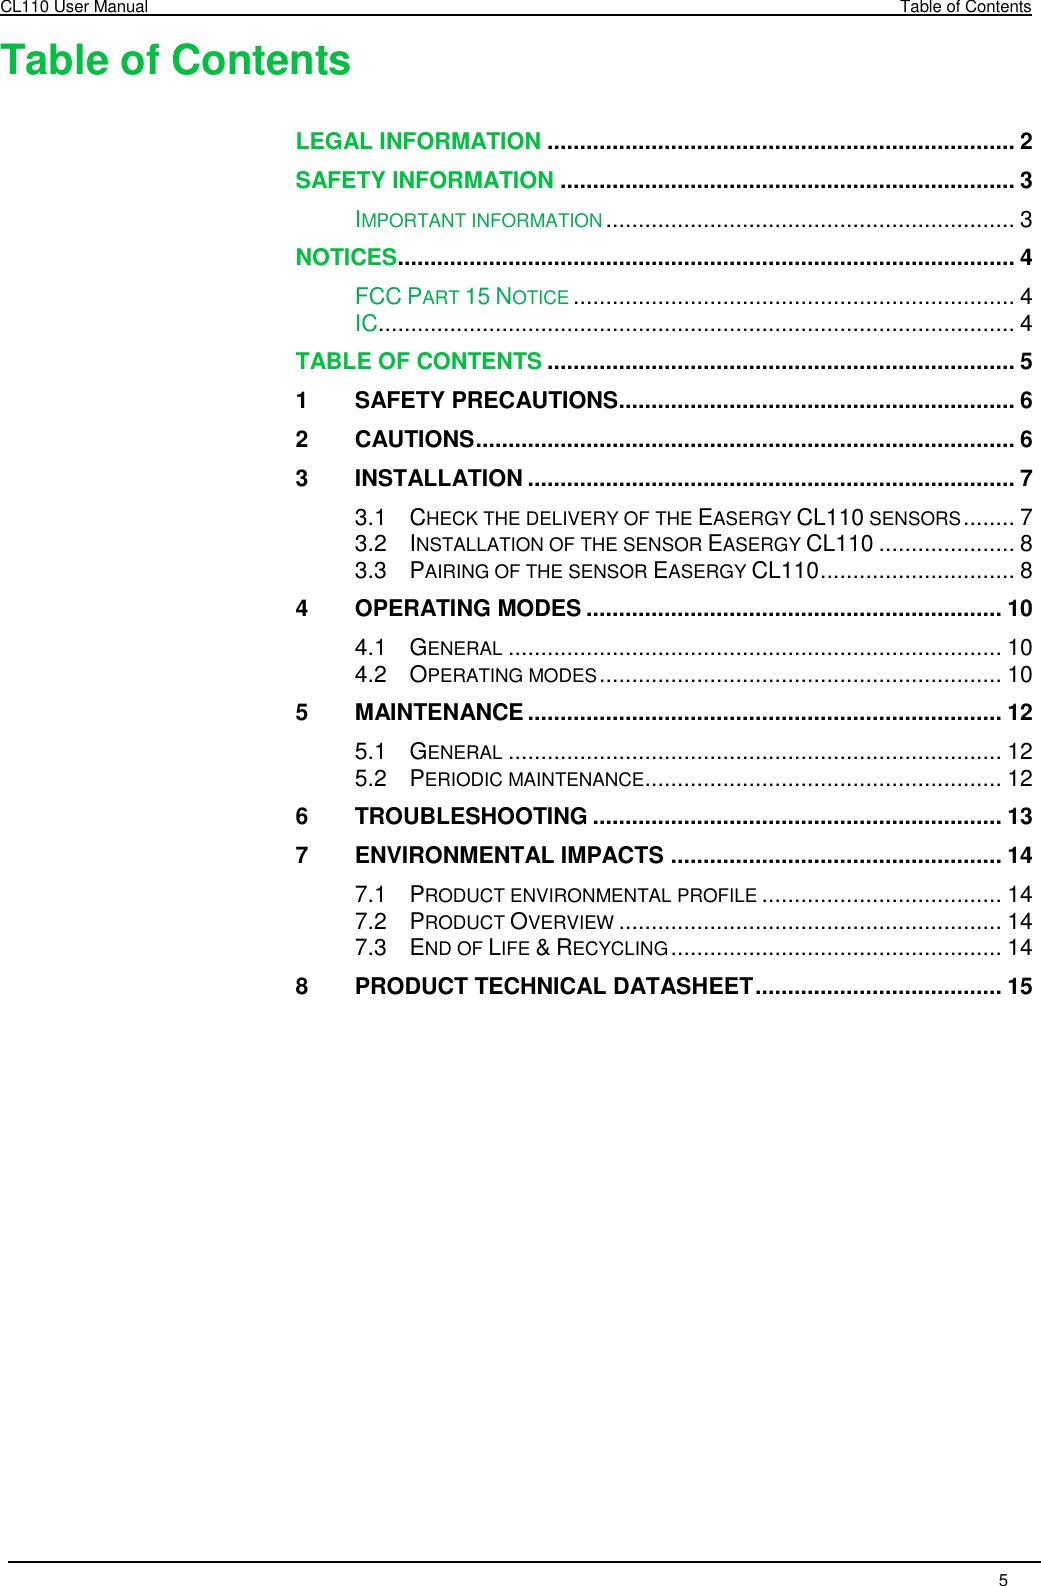 CL110 User Manual  Table of Contents   5  Table of Contents  LEGAL INFORMATION ........................................................................ 2 SAFETY INFORMATION ...................................................................... 3 IMPORTANT INFORMATION ............................................................... 3 NOTICES ............................................................................................... 4 FCC PART 15 NOTICE .................................................................... 4 IC .................................................................................................. 4 TABLE OF CONTENTS ........................................................................ 5 1 SAFETY PRECAUTIONS ............................................................. 6 2 CAUTIONS ................................................................................... 6 3 INSTALLATION ........................................................................... 7 3.1 CHECK THE DELIVERY OF THE EASERGY CL110 SENSORS ........ 7 3.2 INSTALLATION OF THE SENSOR EASERGY CL110 ..................... 8 3.3 PAIRING OF THE SENSOR EASERGY CL110 .............................. 8 4 OPERATING MODES ................................................................ 10 4.1 GENERAL ............................................................................ 10 4.2 OPERATING MODES .............................................................. 10 5 MAINTENANCE ......................................................................... 12 5.1 GENERAL ............................................................................ 12 5.2 PERIODIC MAINTENANCE....................................................... 12 6 TROUBLESHOOTING ............................................................... 13 7 ENVIRONMENTAL IMPACTS ................................................... 14 7.1 PRODUCT ENVIRONMENTAL PROFILE ..................................... 14 7.2 PRODUCT OVERVIEW ........................................................... 14 7.3 END OF LIFE &amp; RECYCLING ................................................... 14 8 PRODUCT TECHNICAL DATASHEET ...................................... 15 